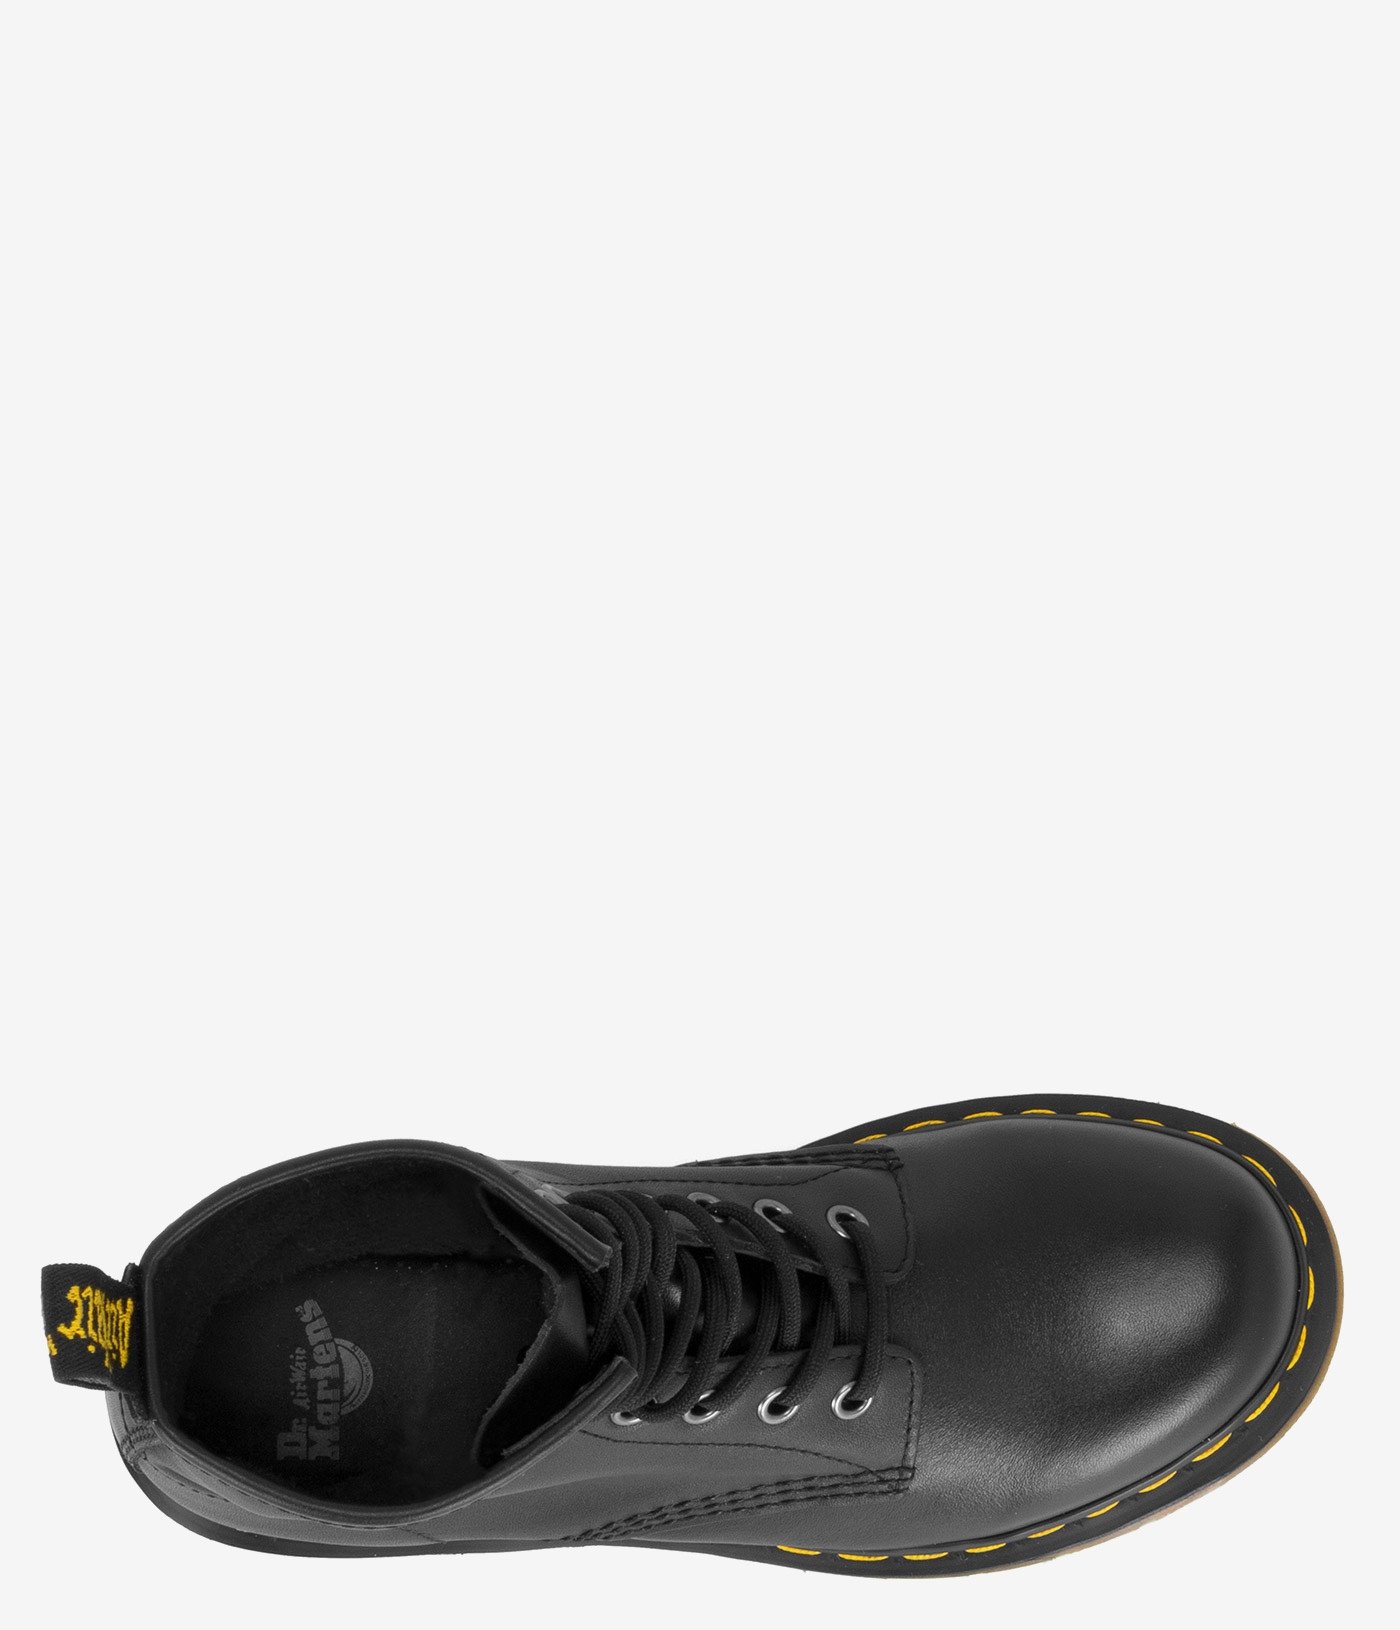 Dr. Martens 1460 Nappa Leather Lace Up Boot | Boot World